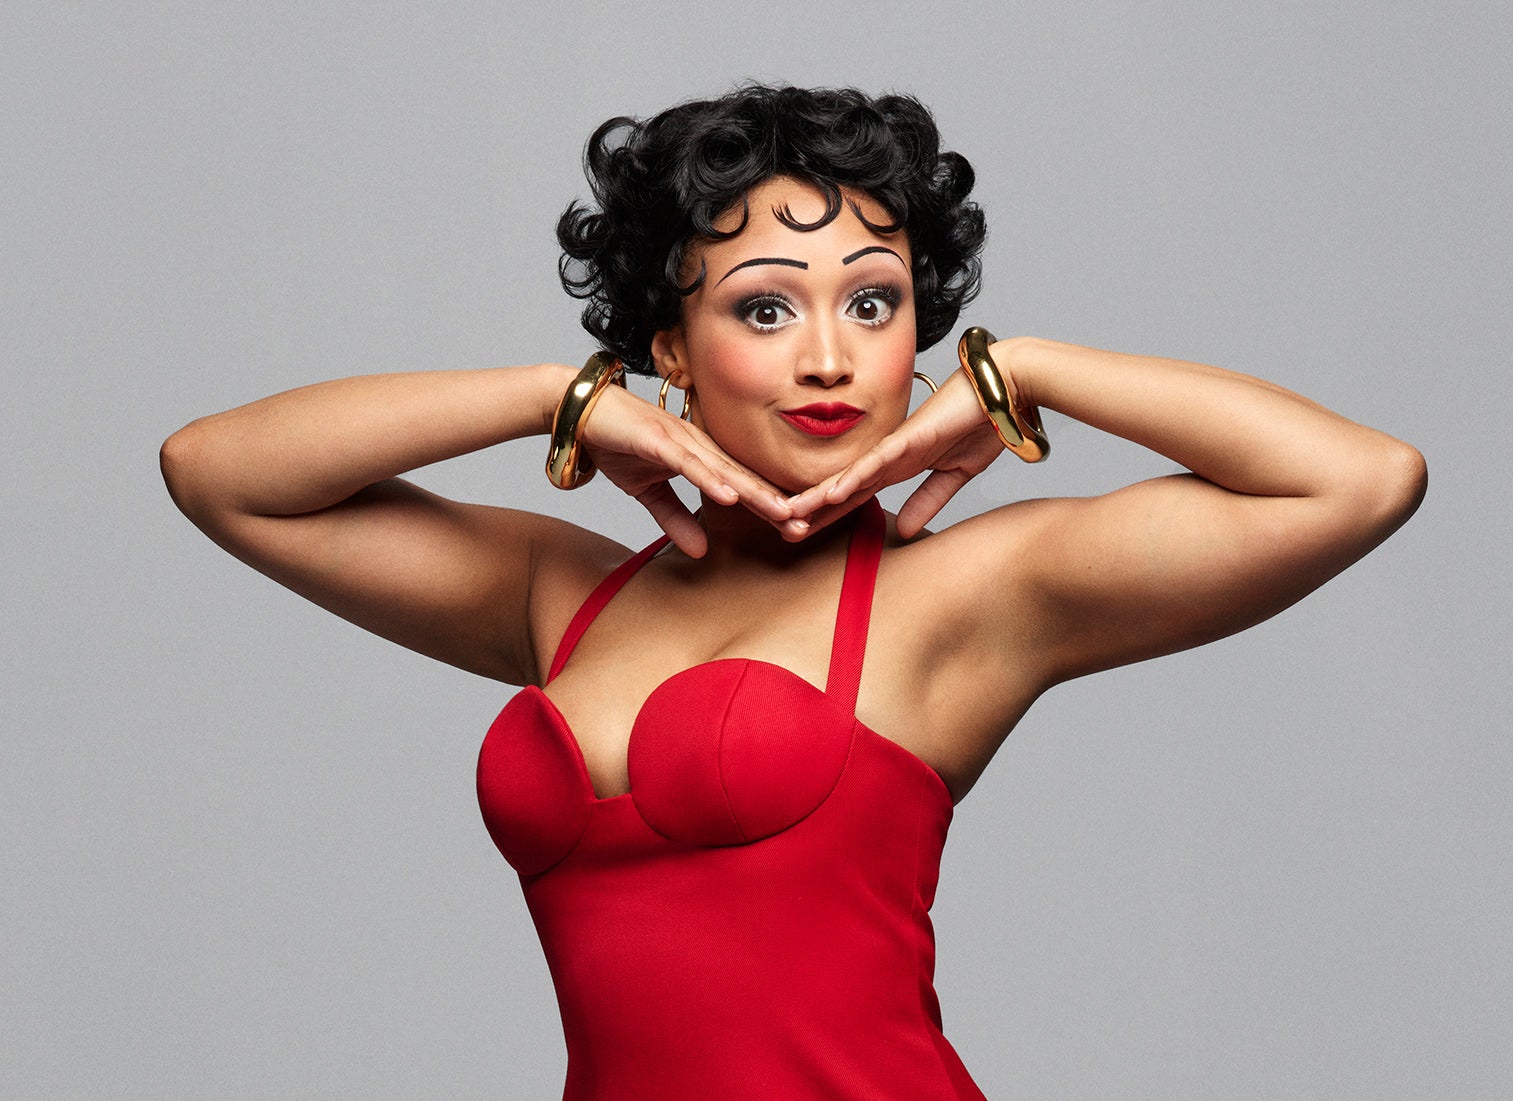 Rising star Jasmine Amy Rogers is tapped to play iconic Betty Boop